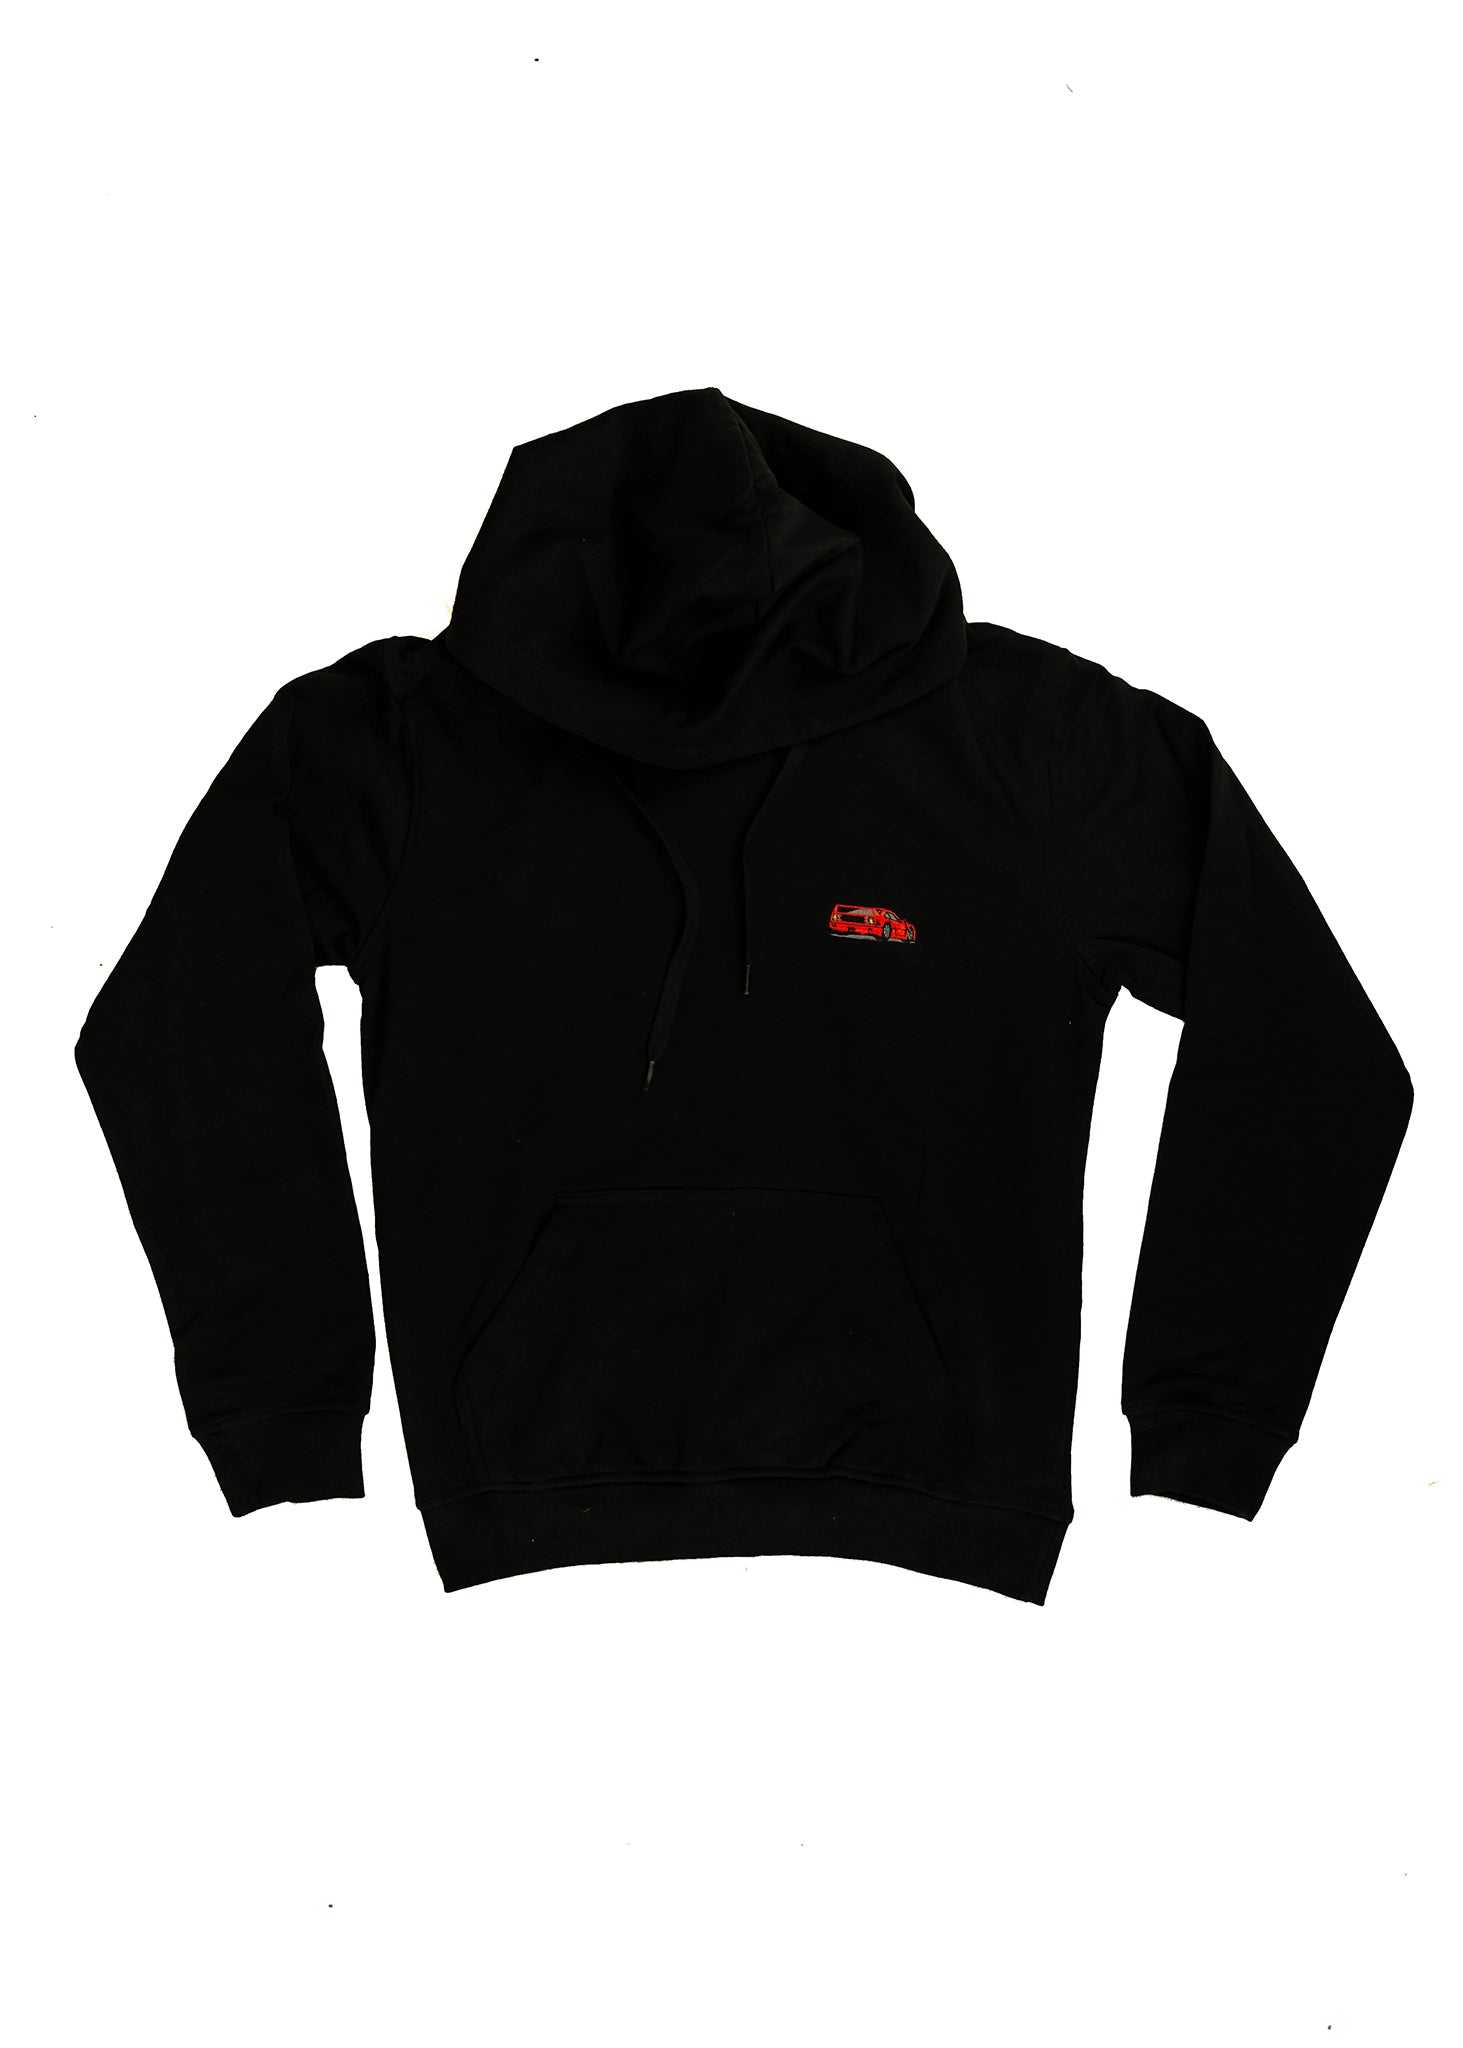 A black unisex hoodie for men and women. Full size front view of the black sweater with a red embroidered F40. Fabric composition is cotton, polyester, and rayon. The material is very soft, stretchy, and non-transparent. The style of this hoodie is long sleeve, crewneck with a hood, hooded, with embroidery on the left chest.